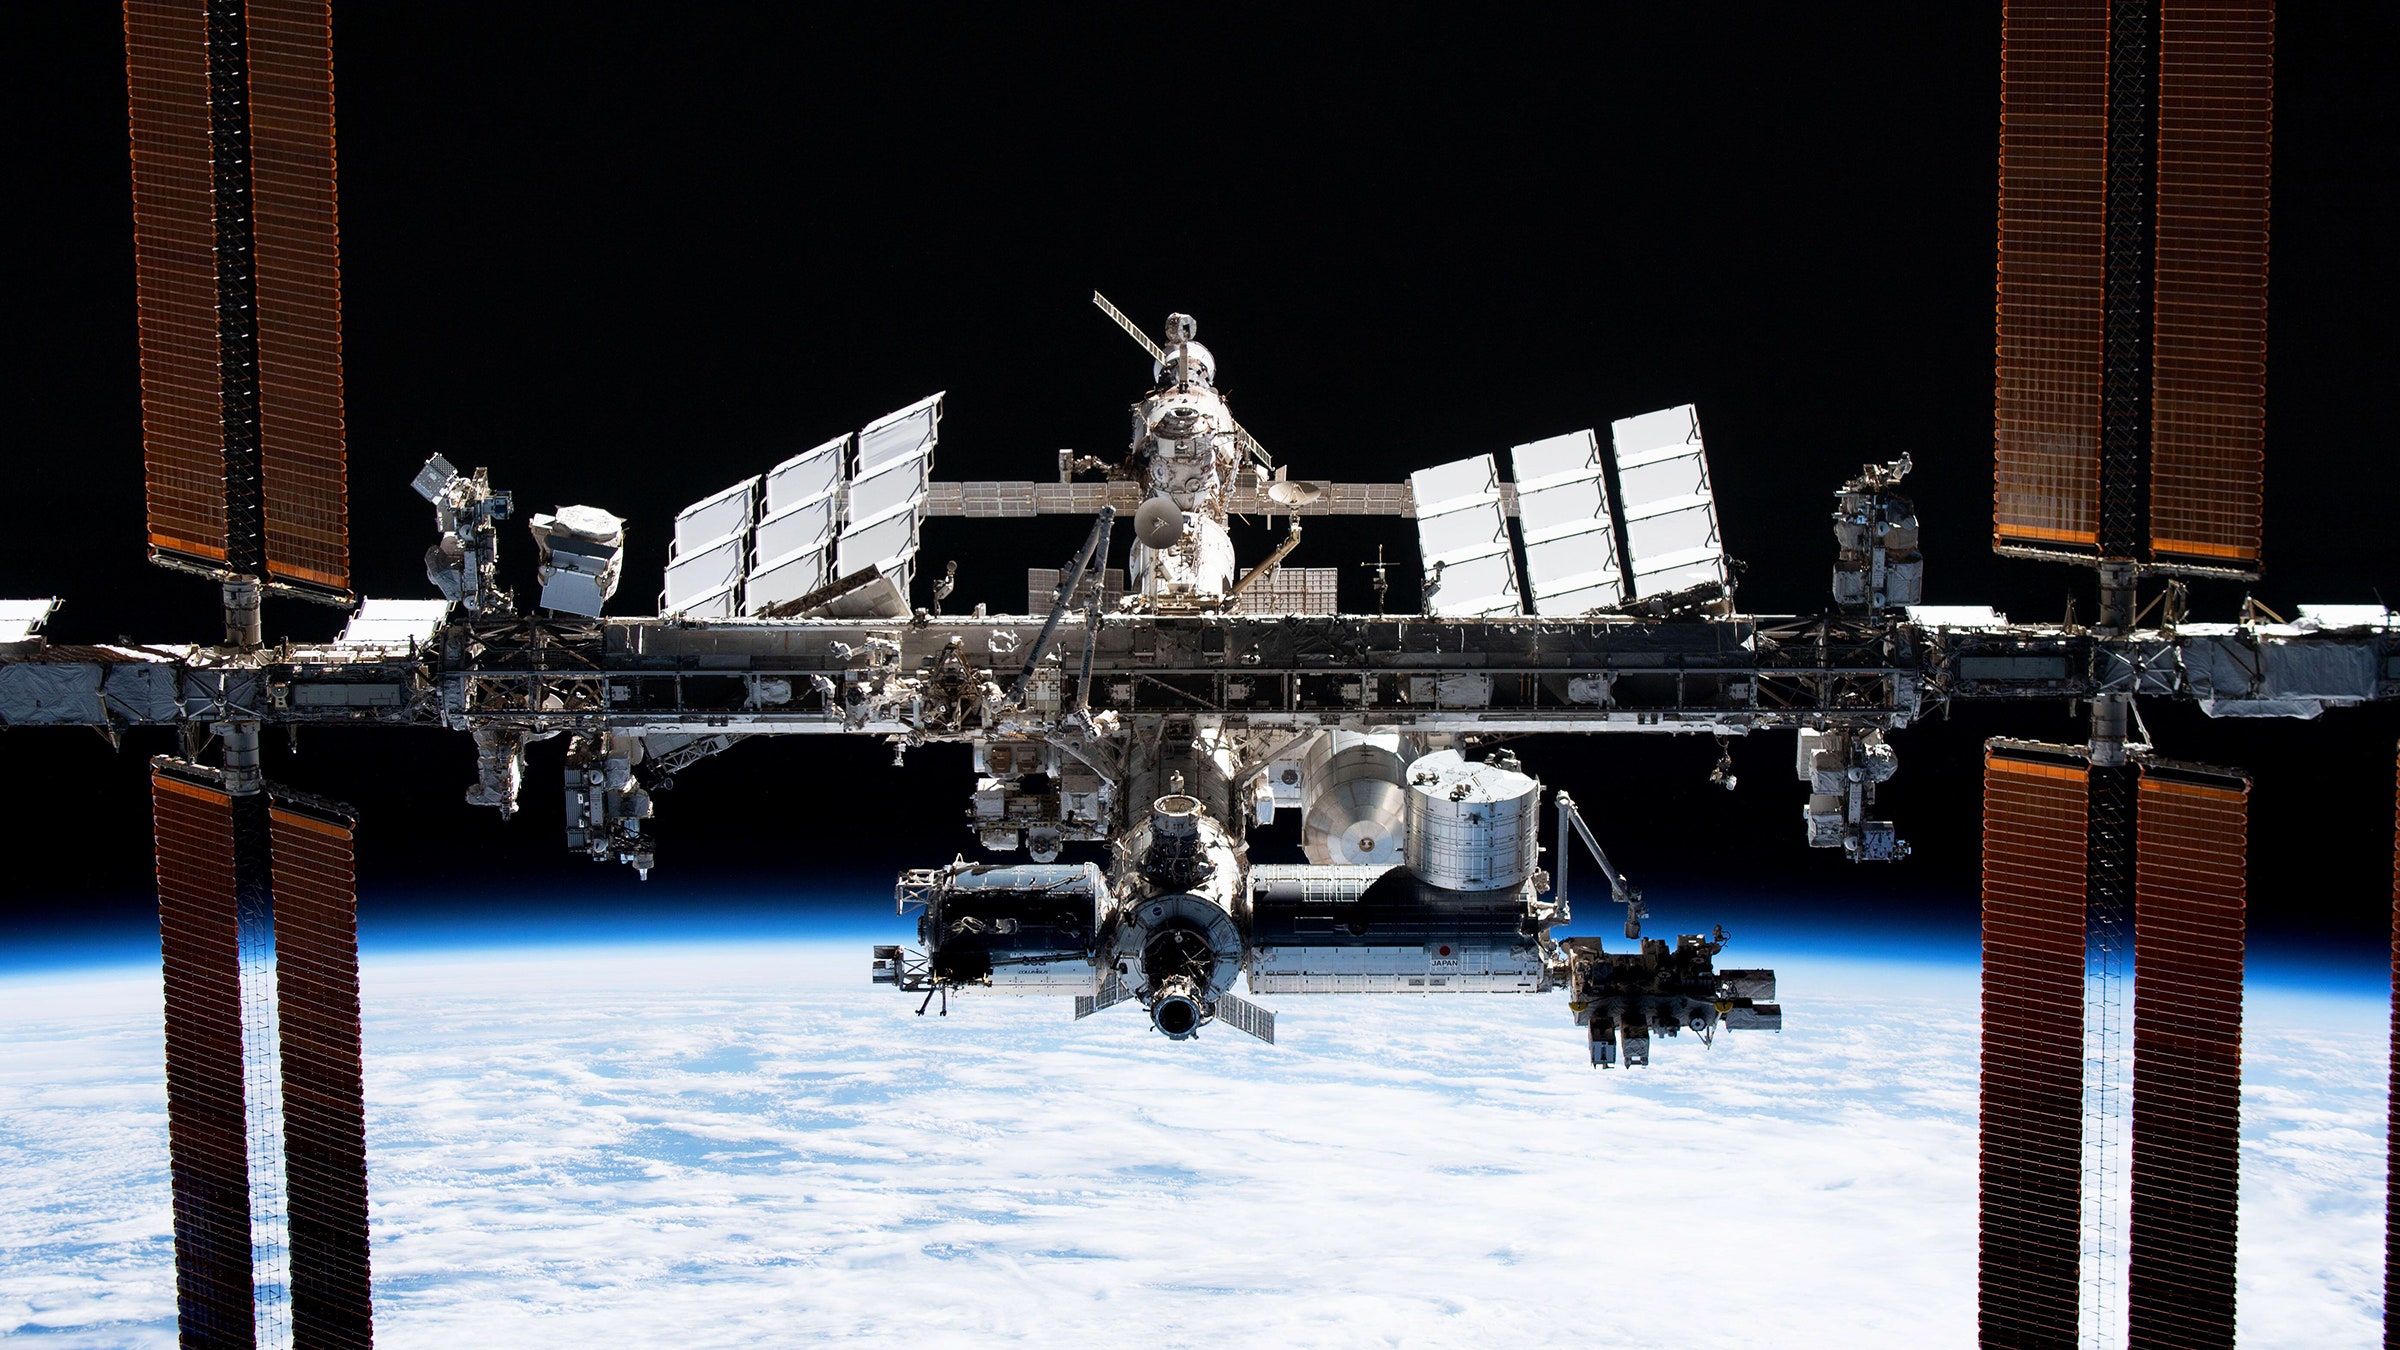 How can microgravity in space help improve drug development?